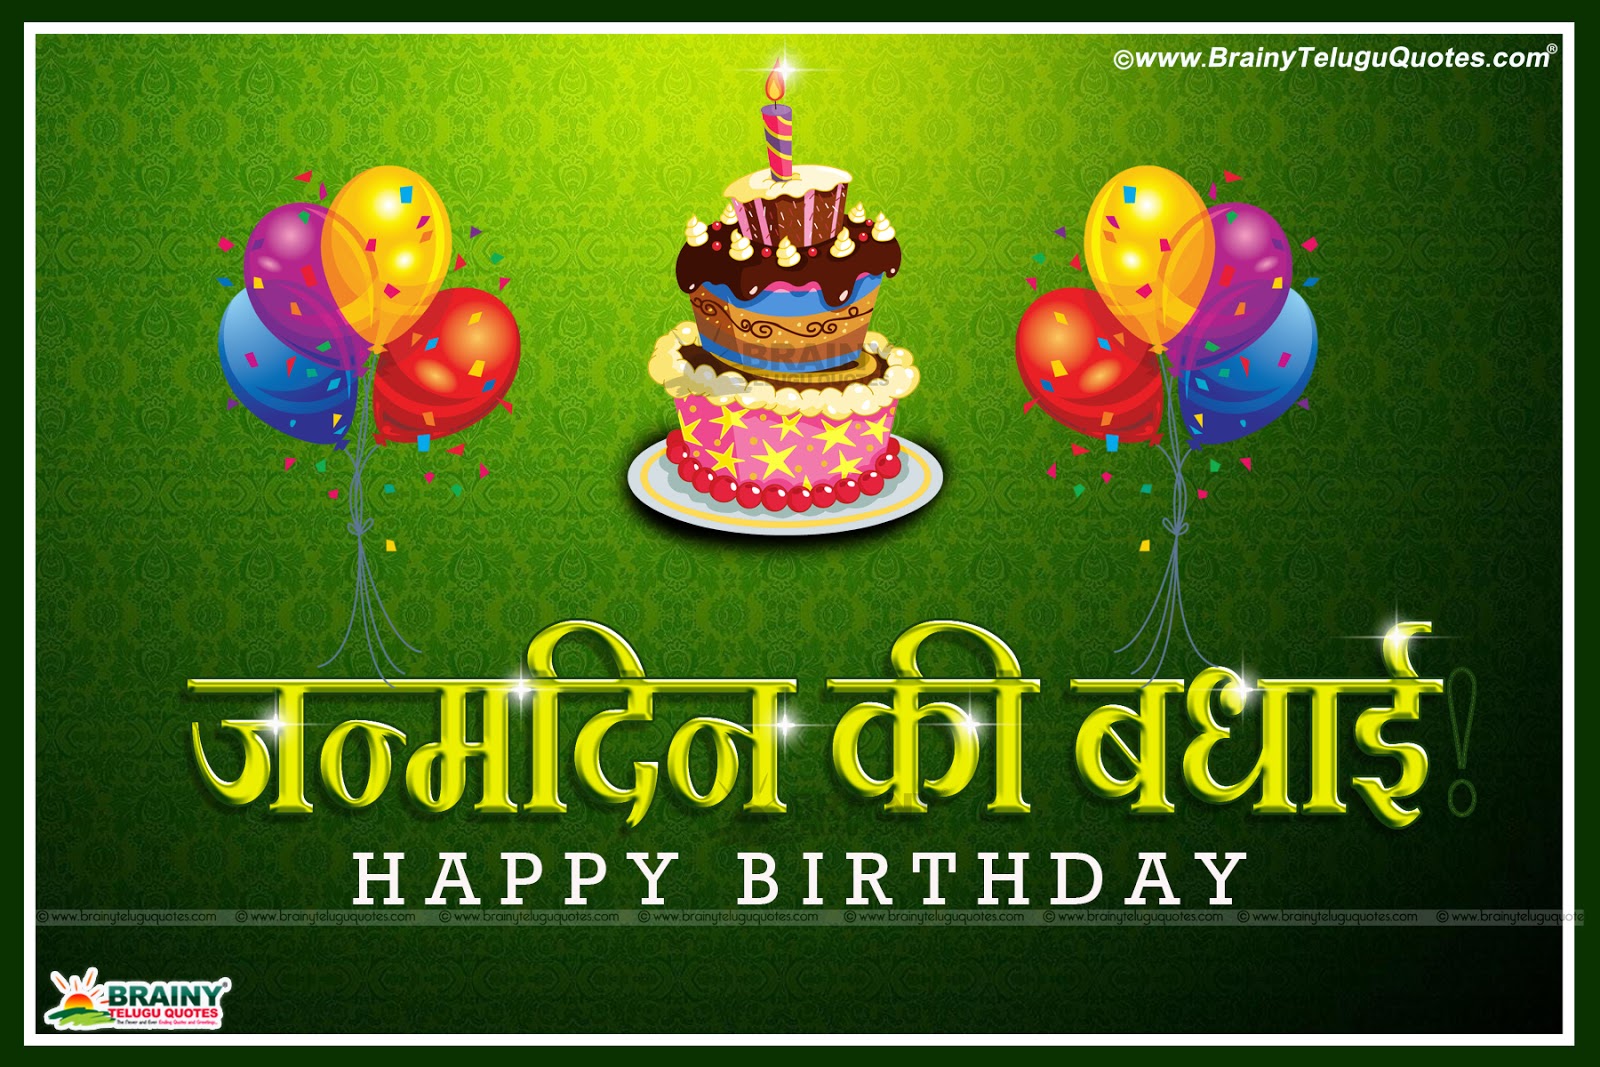 2017 Best Birthday Wishes Cards for Dearest Friends in hindi जन्मदिन की